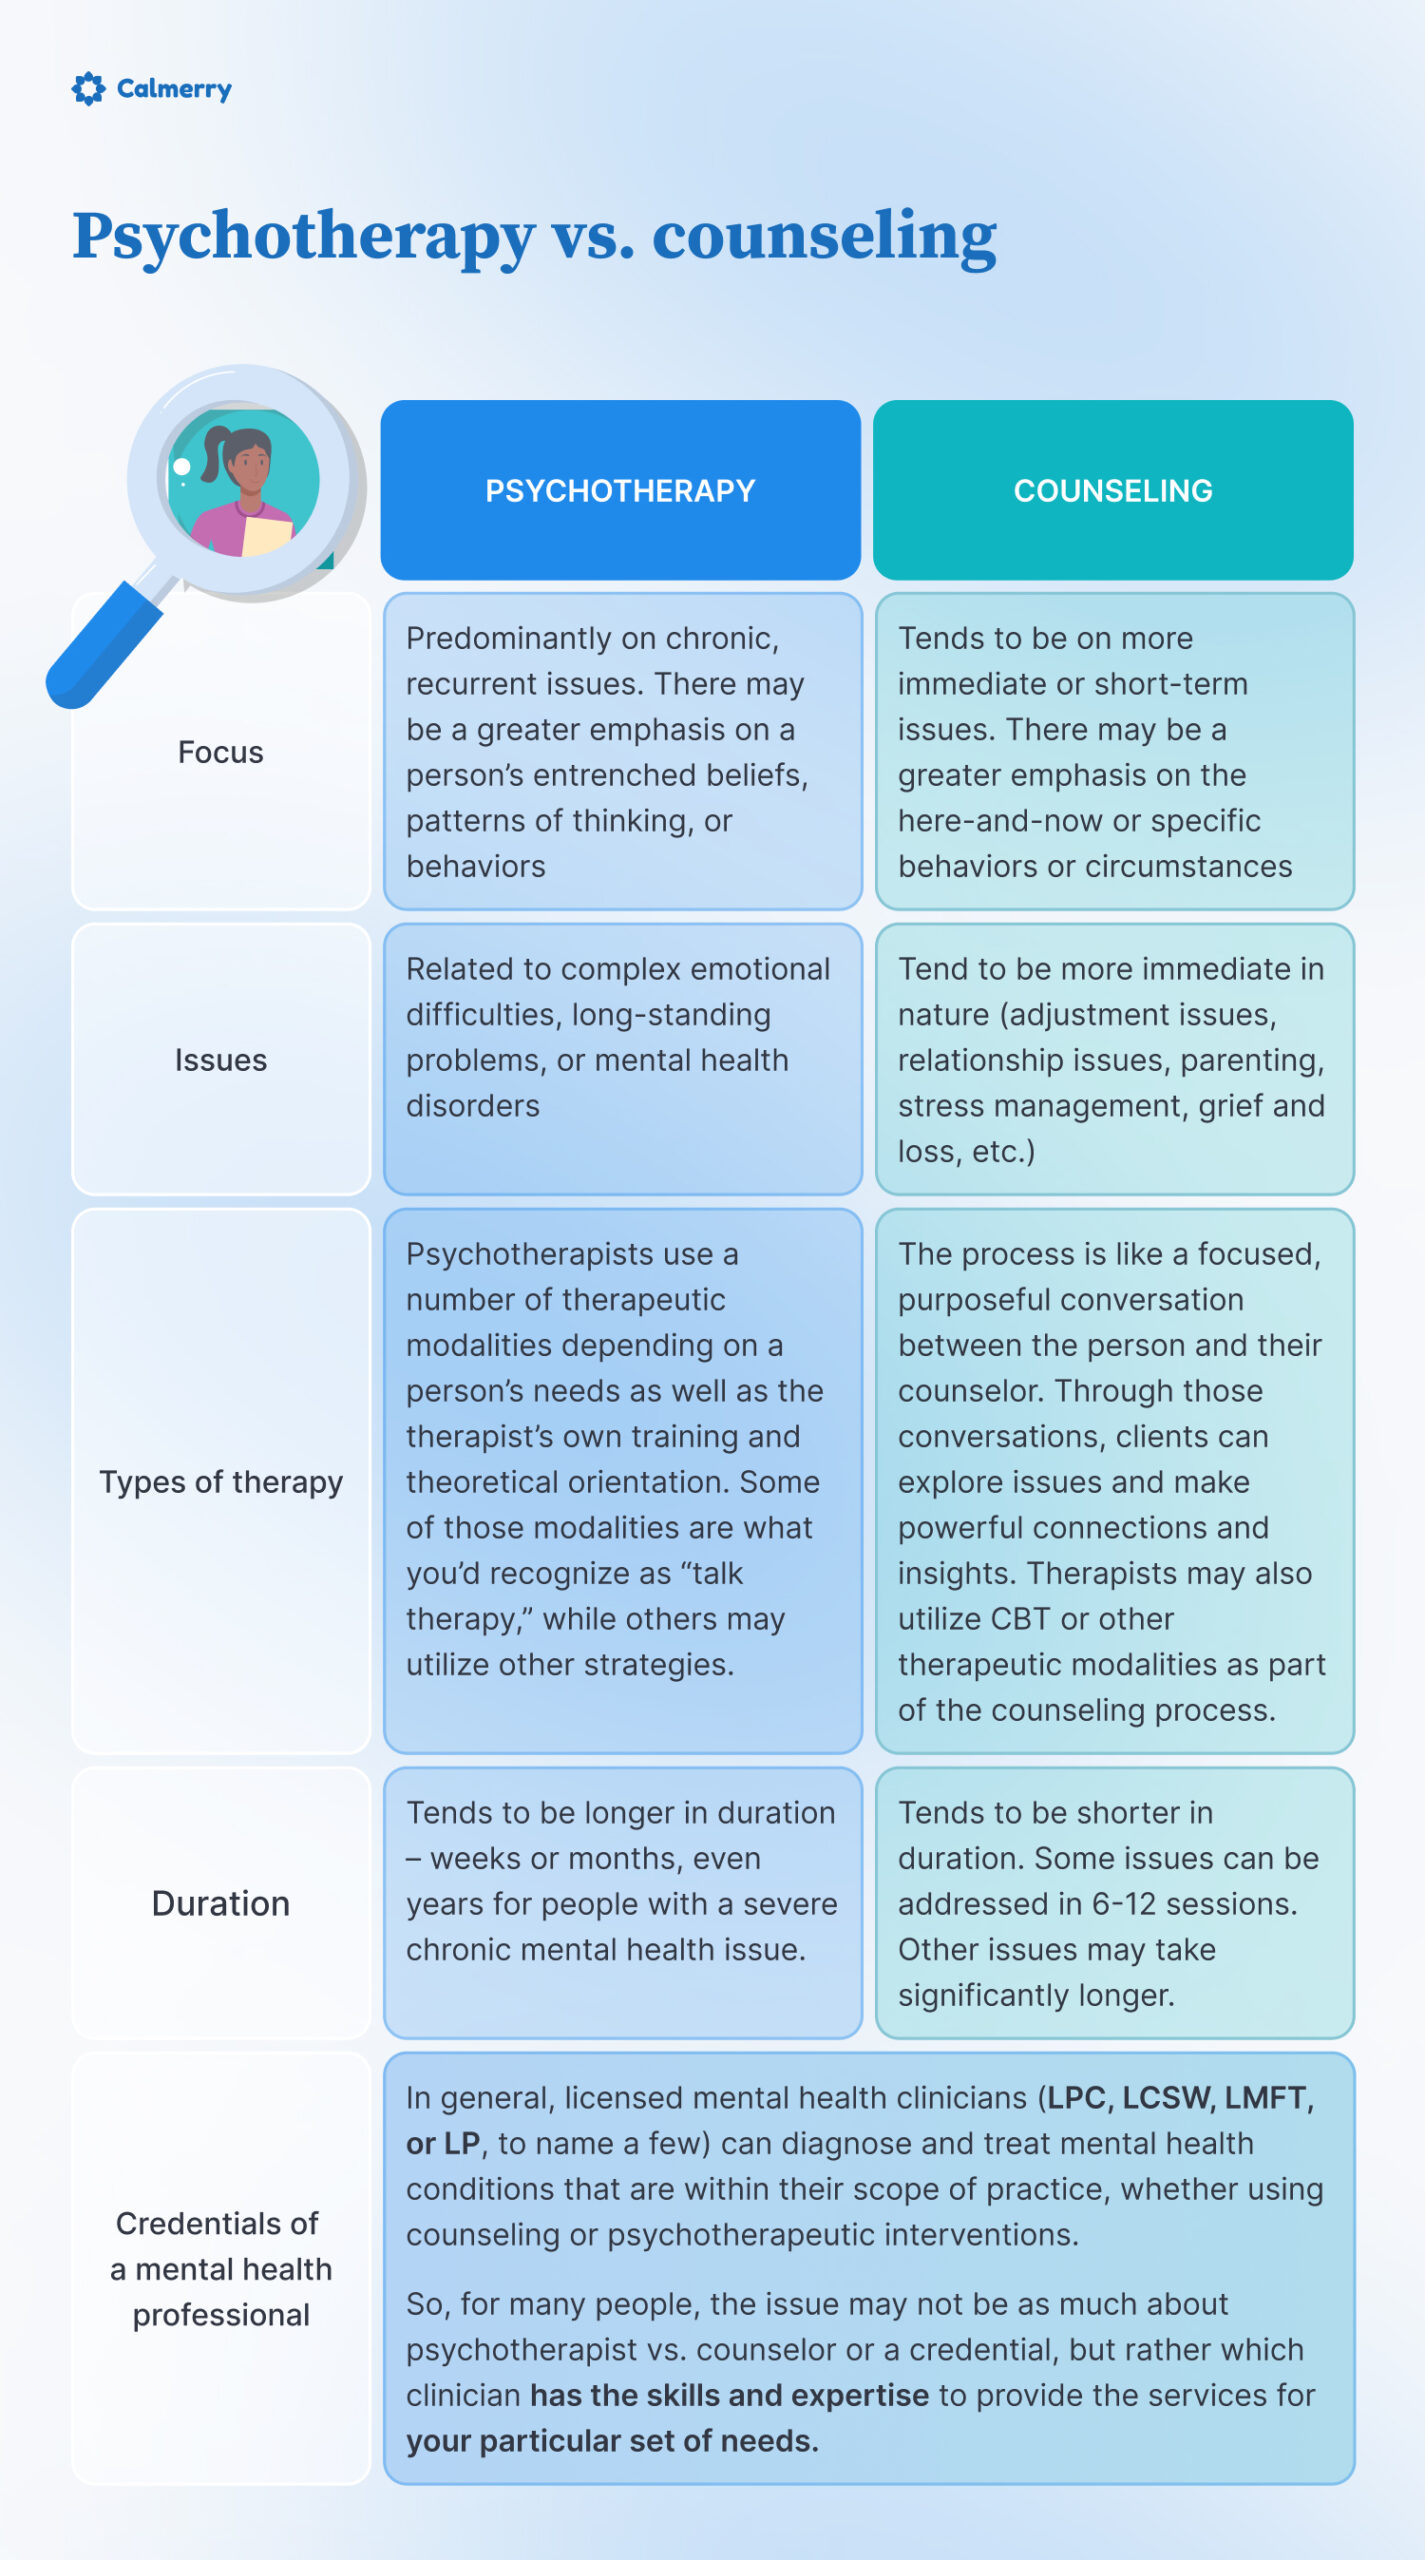  Psychotherapy vs. counseling
Focus
Predominantly on chronic, recurrent issues. There may be a greater emphasis on a person’s entrenched beliefs, patterns of thinking, or behaviors
Tends to be on more immediate or short-term issues. There may be a greater emphasis on the here-and-now or specific behaviors or circumstances
Issues
Related to complex emotional difficulties, long-standing problems, or mental health disorders
Tend to be more immediate in nature (adjustment issues, relationship issues, parenting, stress management, grief and loss, etc.)
Types of therapy
Psychotherapists use a number of therapeutic modalities depending on a person’s needs as well as the therapist’s own training and theoretical orientation. Some of those modalities are what you’d recognize as “talk therapy,” while others may utilize other strategies.

The process is like a focused, purposeful conversation between the person and their counselor. Through those conversations, clients can explore issues and make powerful connections and insights. Therapists may also utilize CBT or other therapeutic modalities as part of the counseling process. 
Duration
Tends to be longer in duration – weeks or months, even years for people with a severe chronic mental health issue. 
Tends to be shorter in duration. Some issues can be addressed in 6-12 sessions. Other issues may take significantly longer. 
Credentials of a mental health professional
In general, licensed mental health clinicians (LPC, LCSW, LMFT, or LP, to name a few) can diagnose and treat mental health conditions that are within their scope of practice, whether using counseling or psychotherapeutic interventions. 
So, for many people, the issue may not be as much about psychotherapist vs. counselor or a credential, but rather which clinician has the skills and expertise to provide the services for your particular set of needs. 